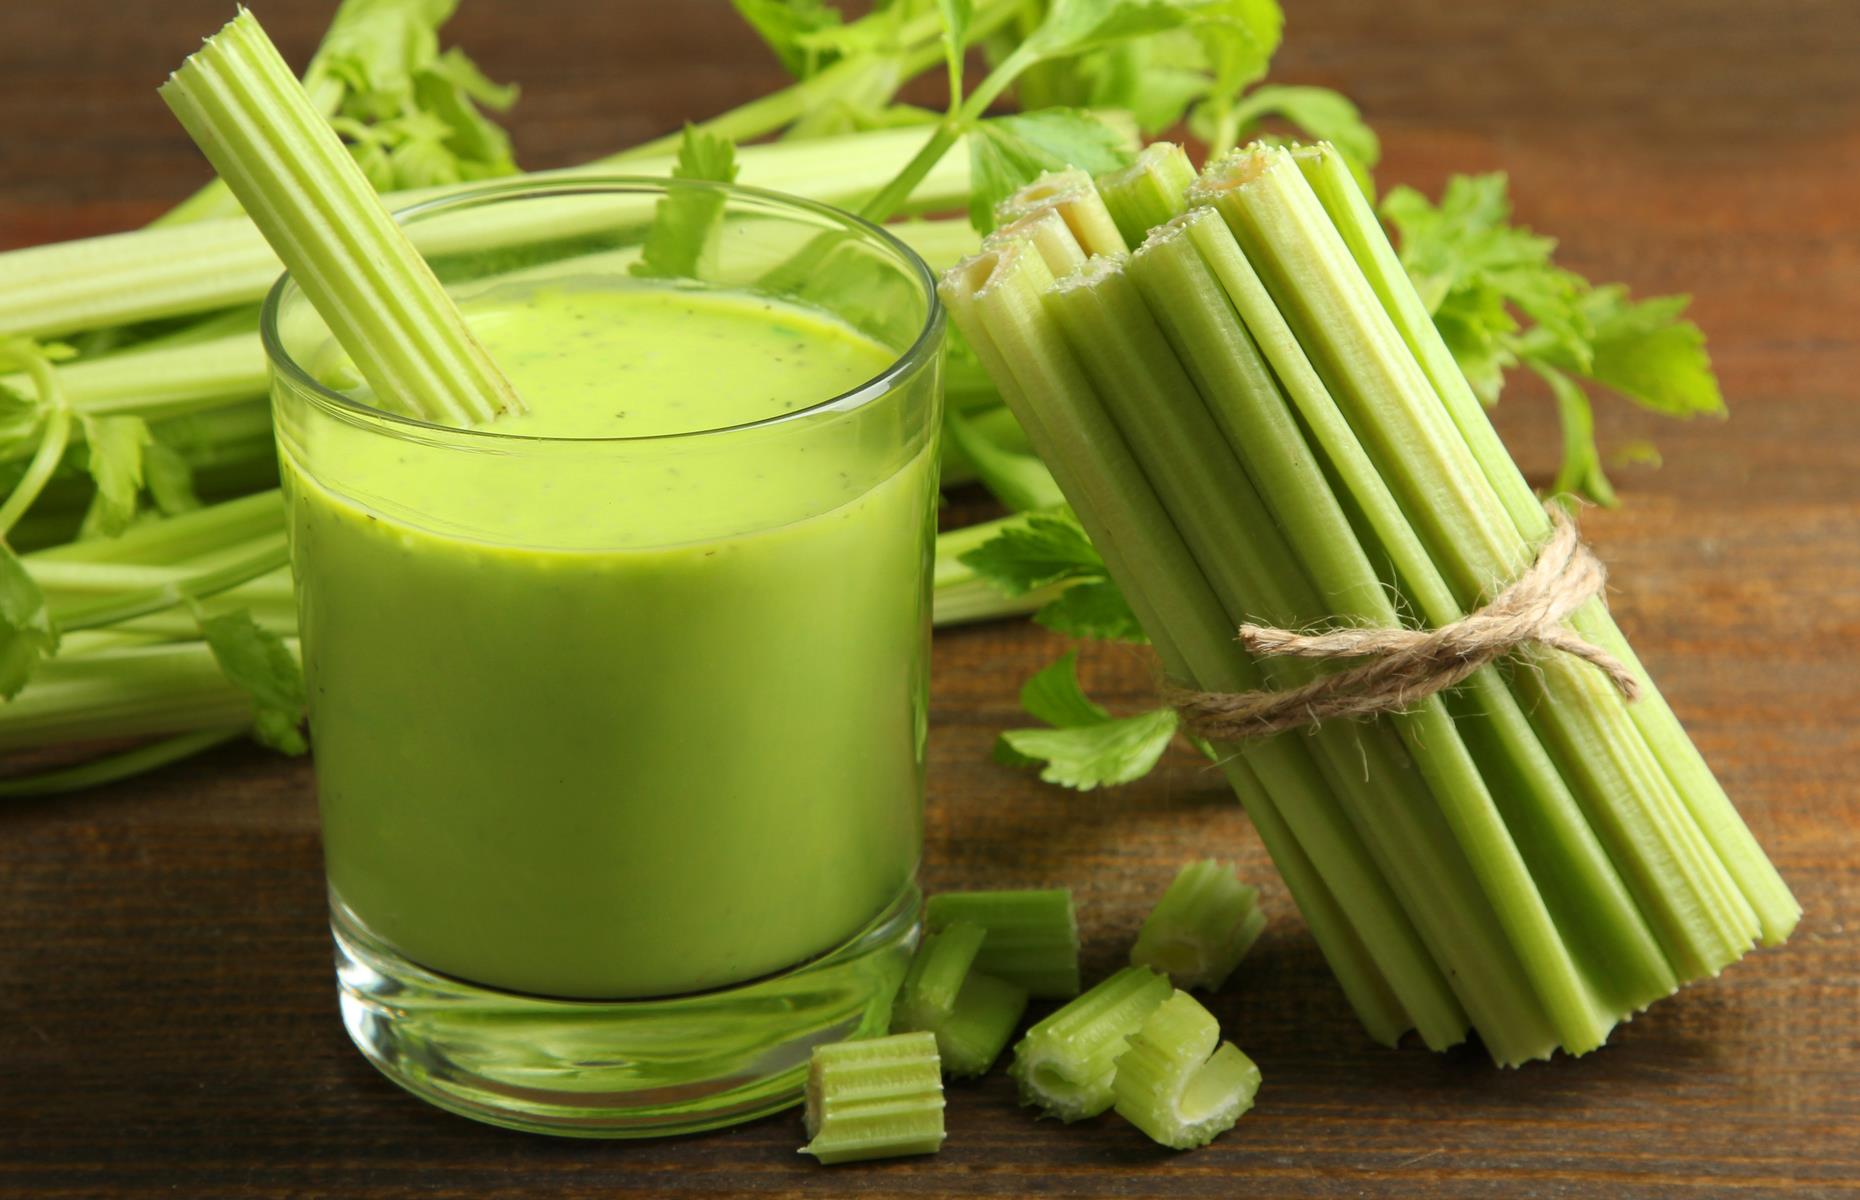 <p>Fresh celery juice is the latest wellness fad, which was largely kicked off by Anthony William, an LA-based wellness influencer who calls himself the Medical Medium and the “originator of a global celery juice movement”. Celery juice fans including <a href="https://twitter.com/debramessing/status/1080172923799982082?lang=en">Debra Messing</a> are said to drink a pint or more a day, claiming it helps with weight loss, skin problems, energy and more. In fact, there’s absolutely no evidence that it's any more or less healthy than other vegetable juices.</p>  <p><strong><a href="https://www.lovefood.com/galleries/68719/the-healthy-eating-facts-you-shouldnt-always-believe?page=1">Now read about the healthy eating facts you shouldn't always believe</a></strong></p>